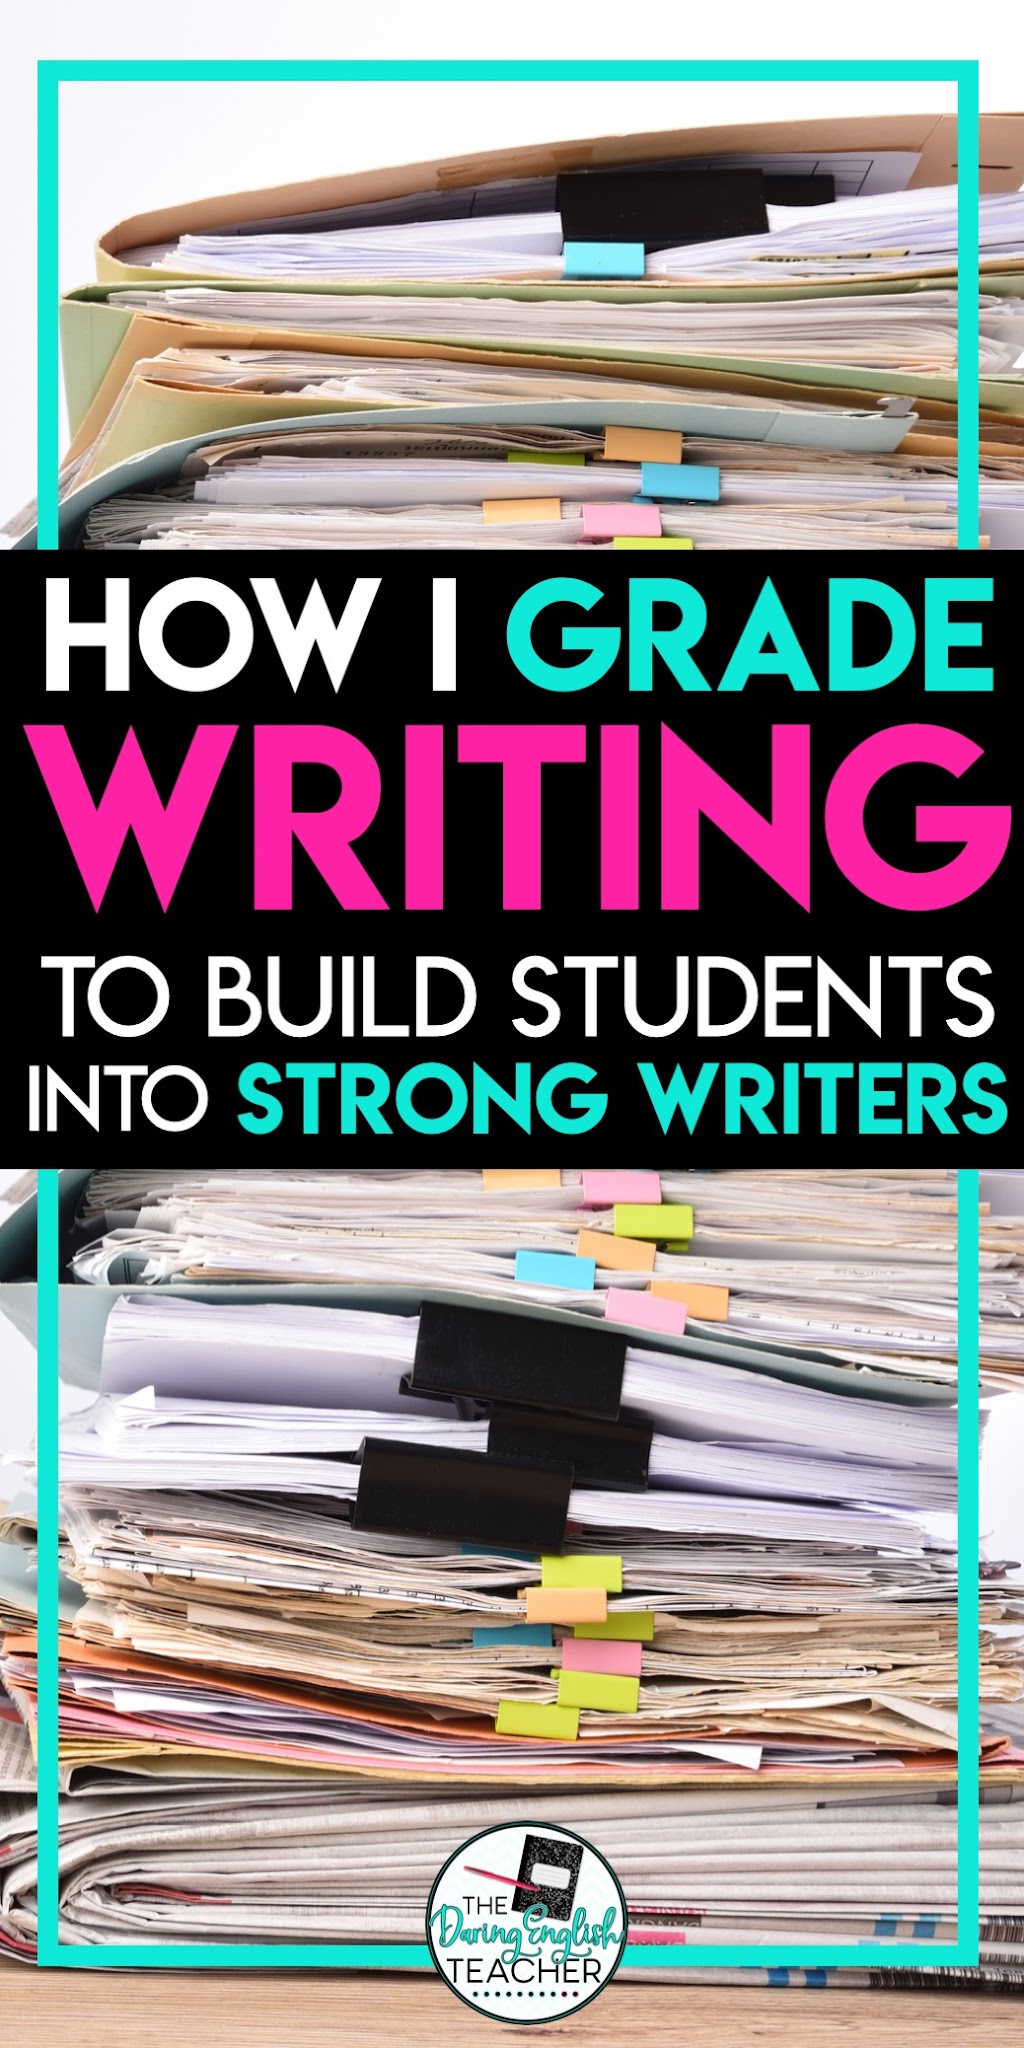 Grading Writing: My philosophy to help students become better writers